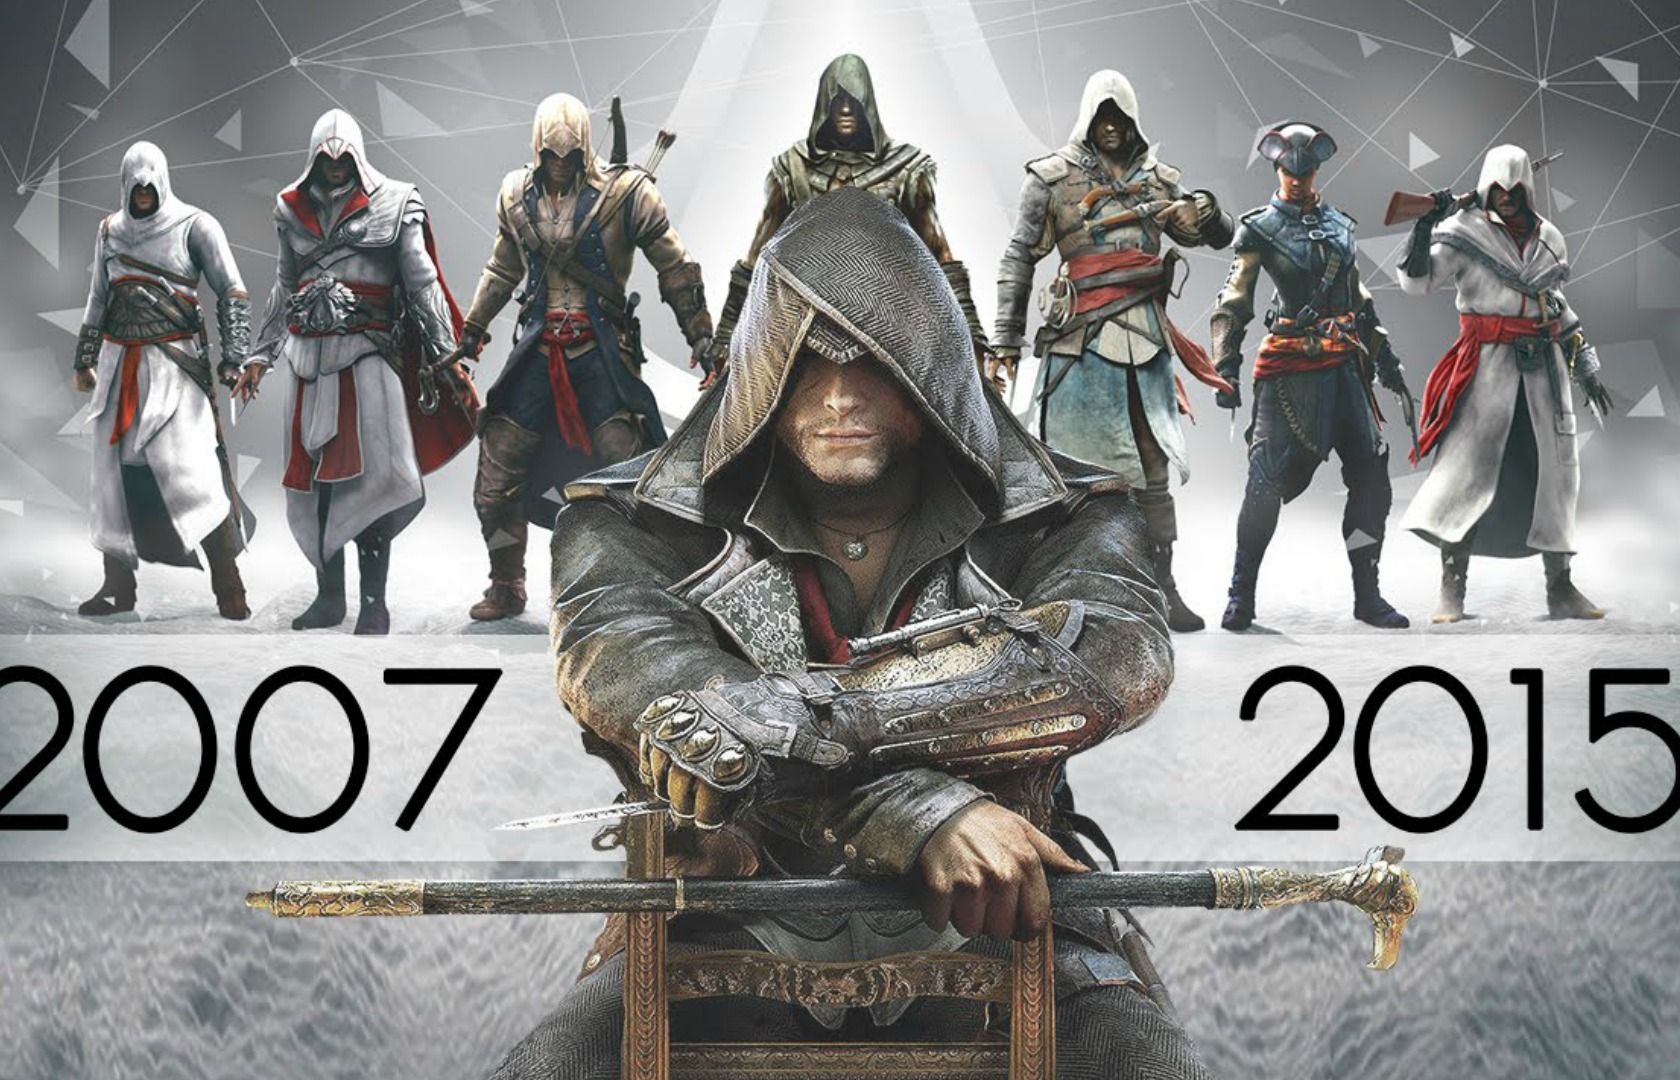 15 Biggest Mistakes Ubisoft Has Ever Made